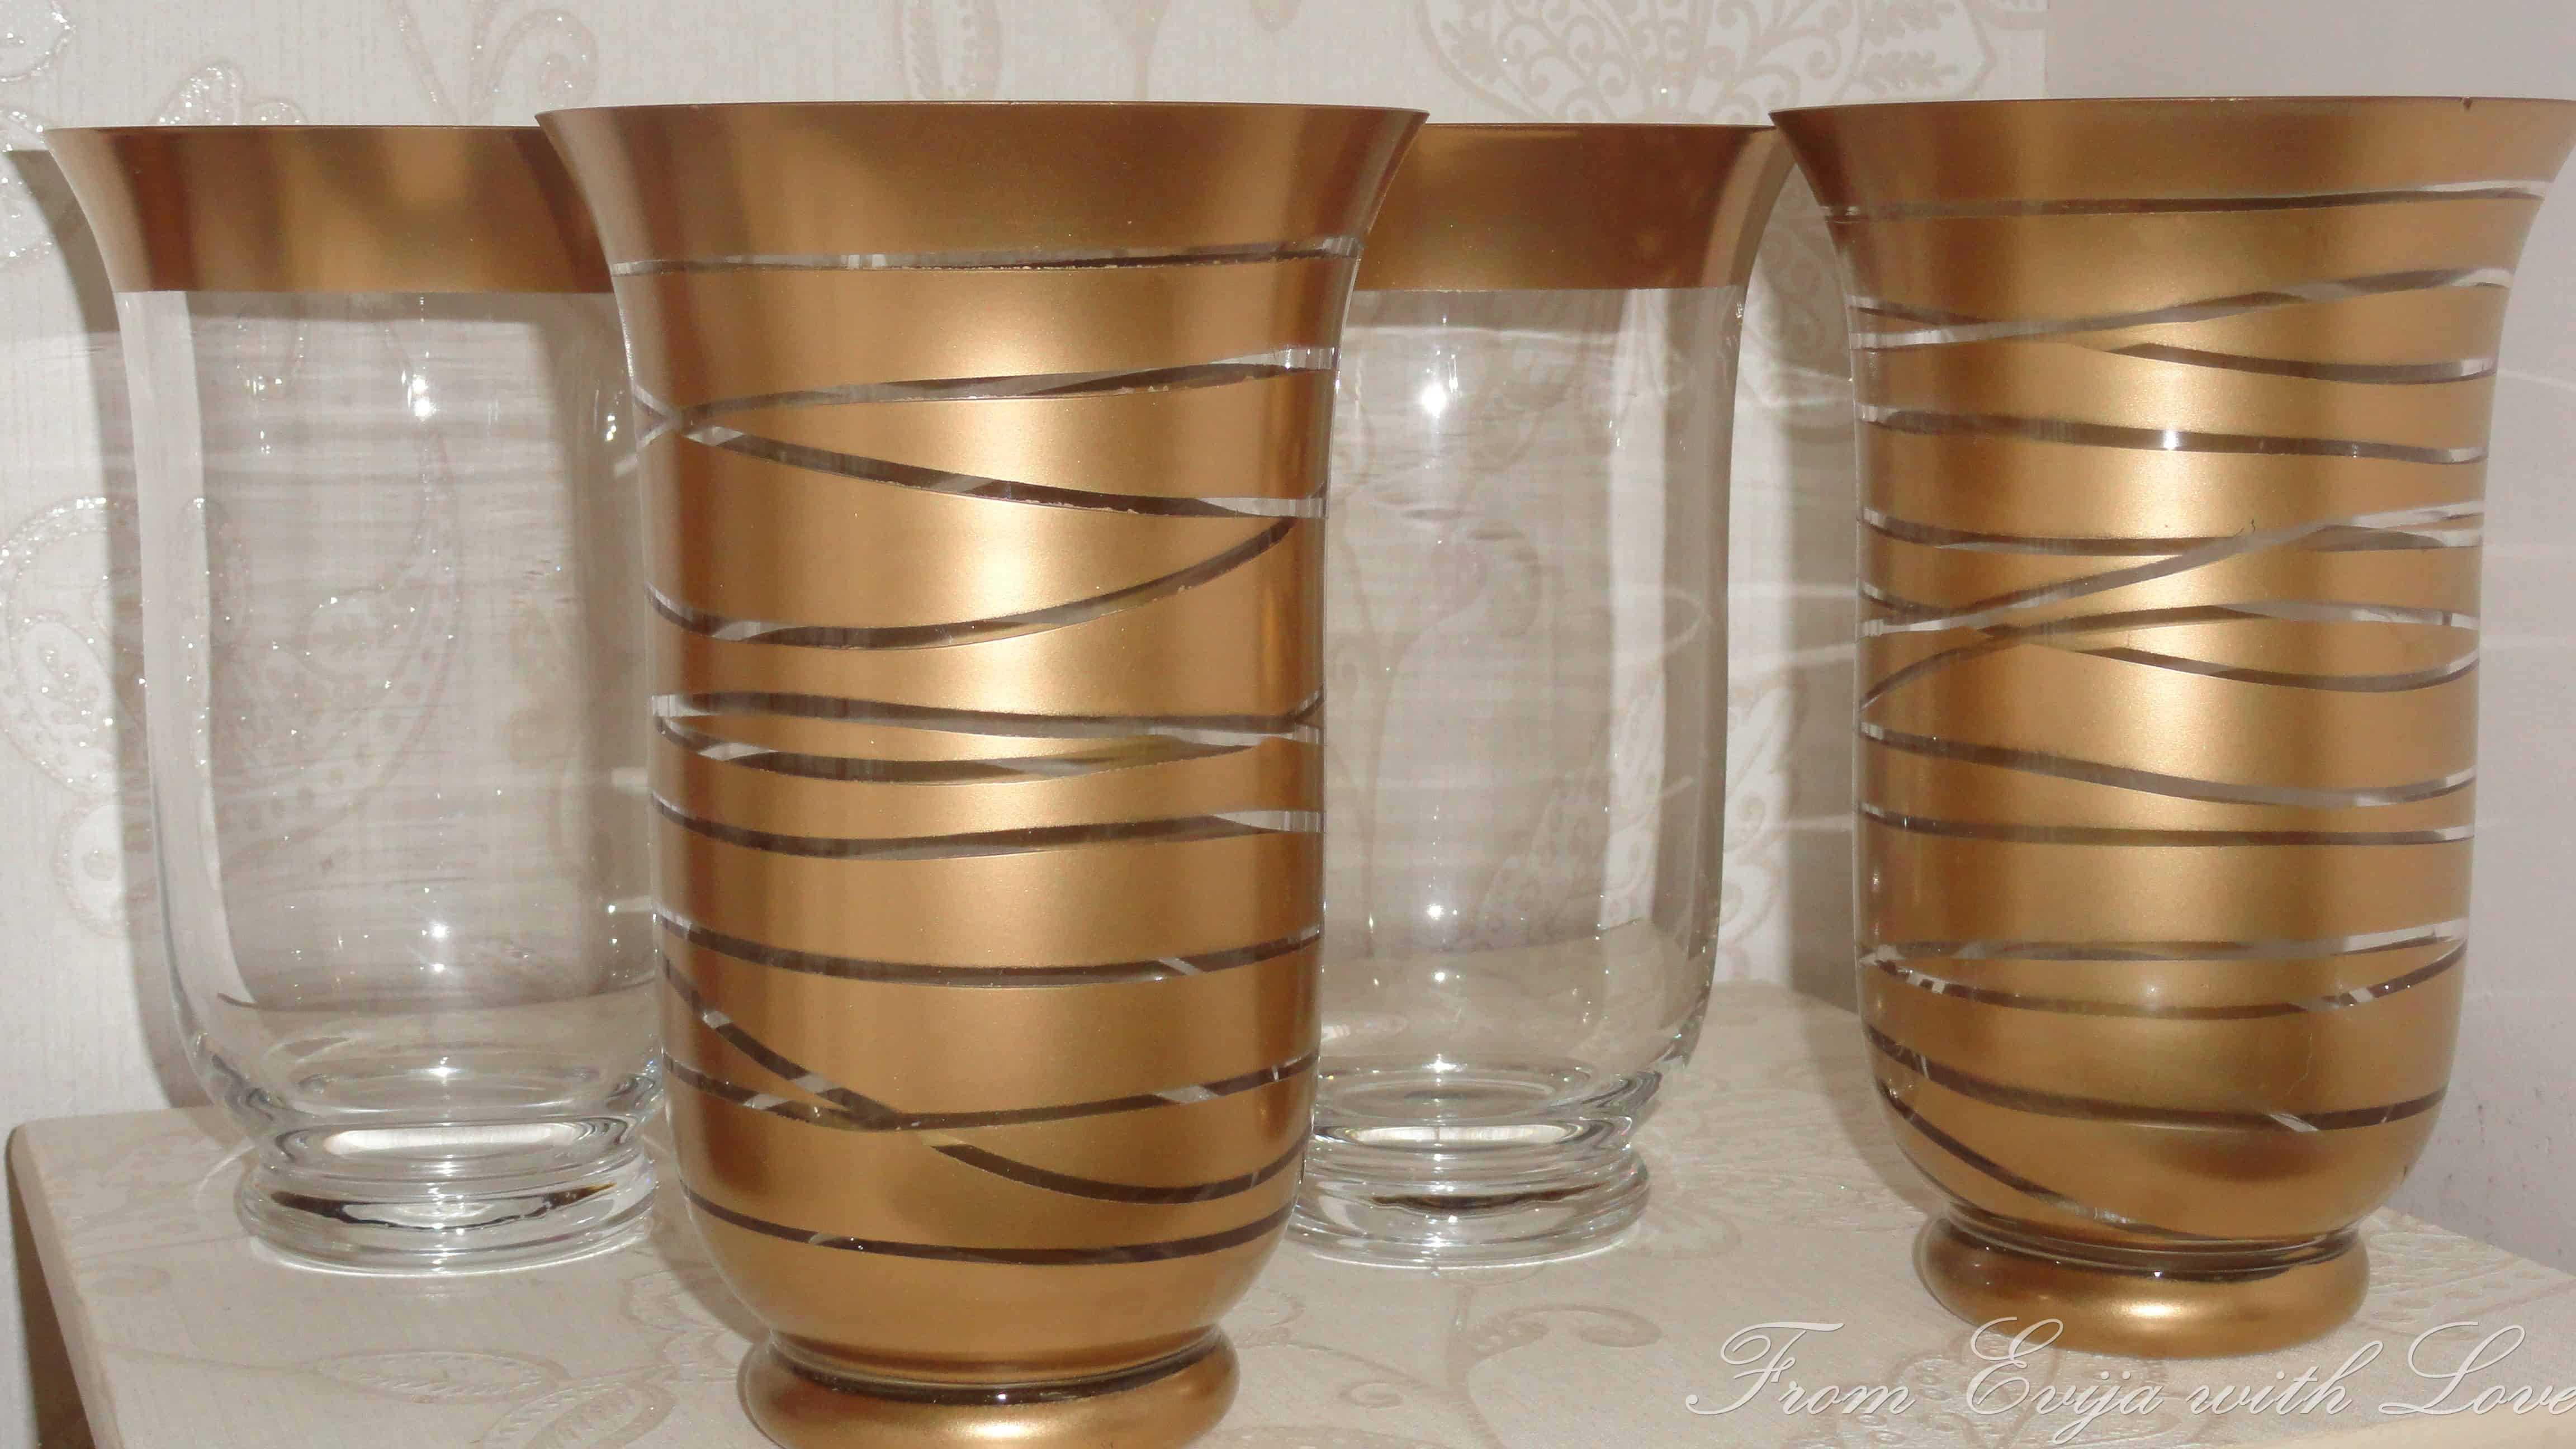 Metallic glass containers